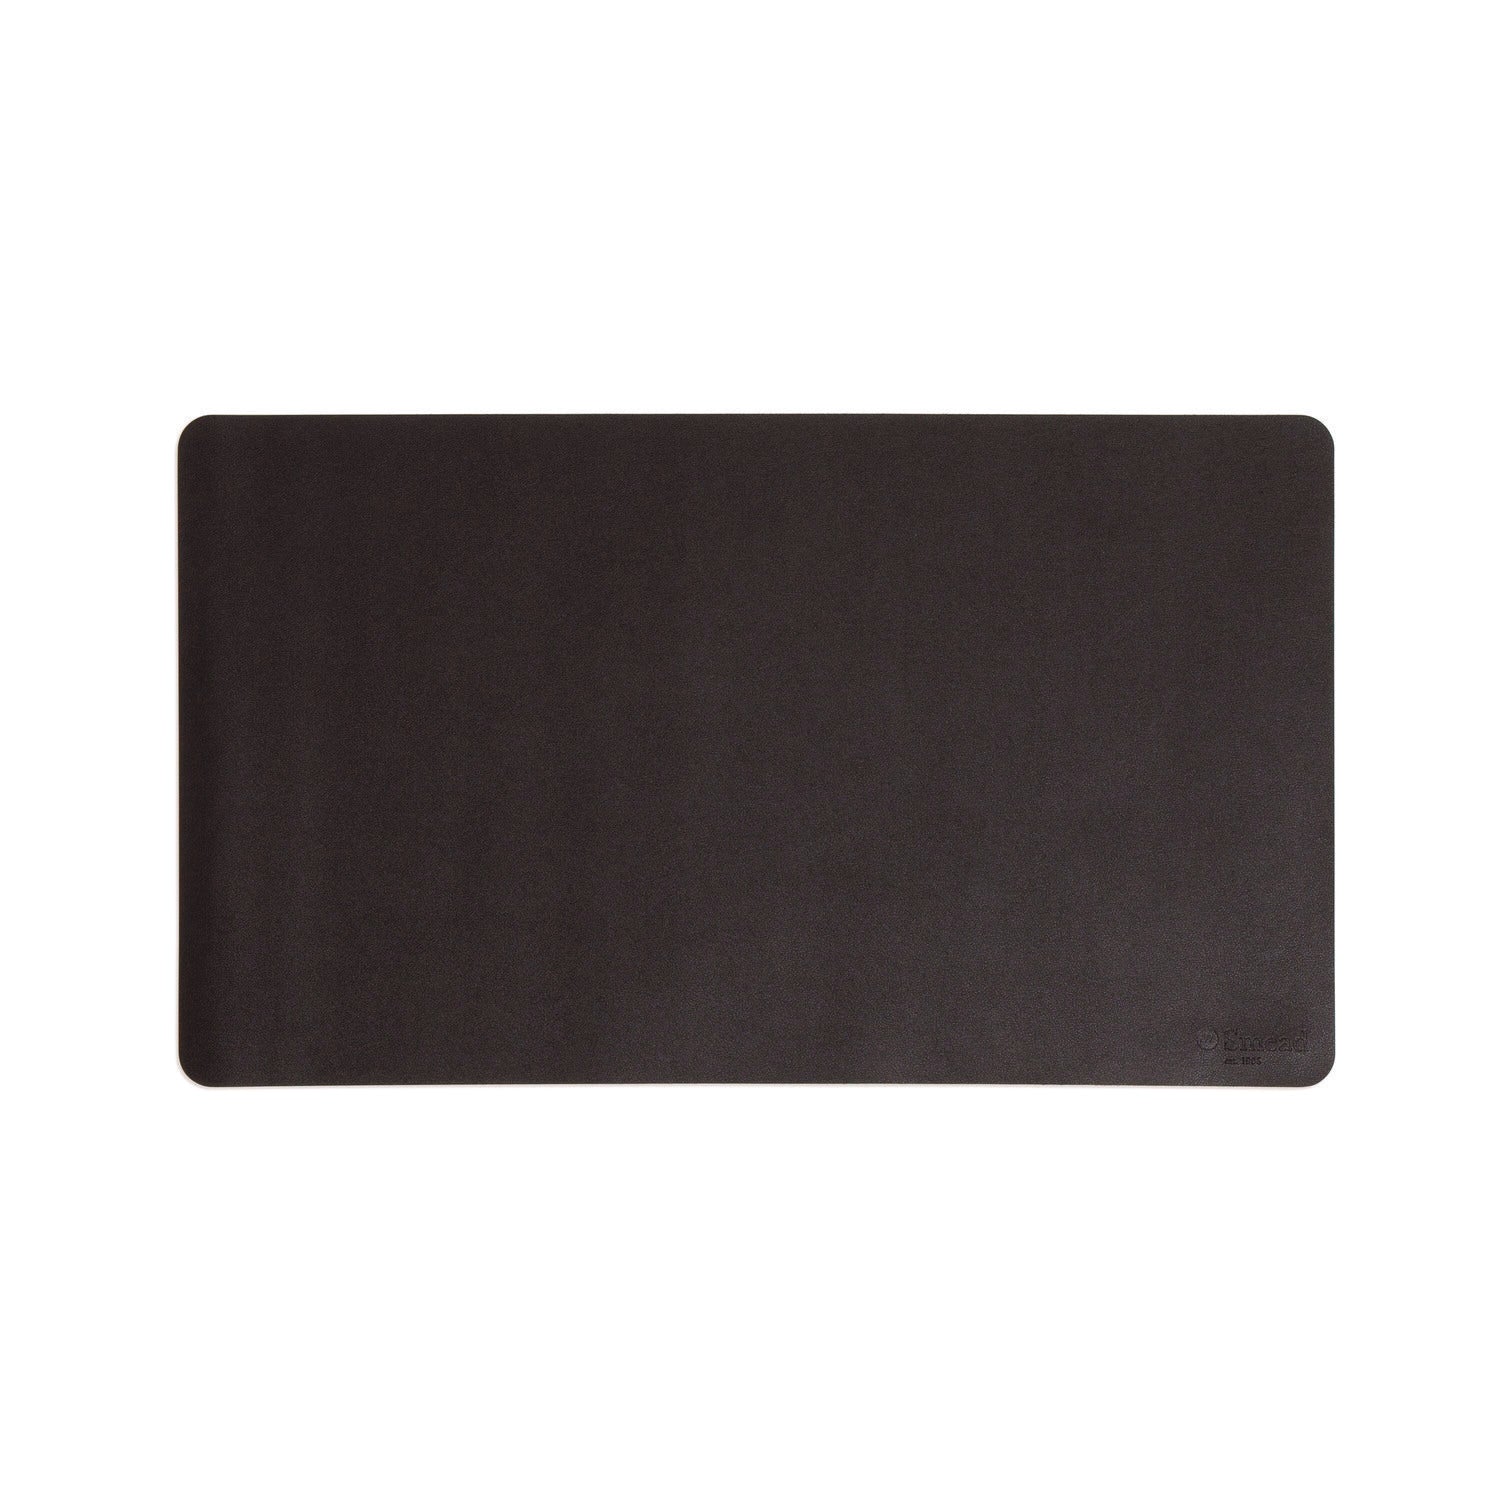 vegan-leather-desk-pads-236-x-137-charcoal_smd64838 - 1